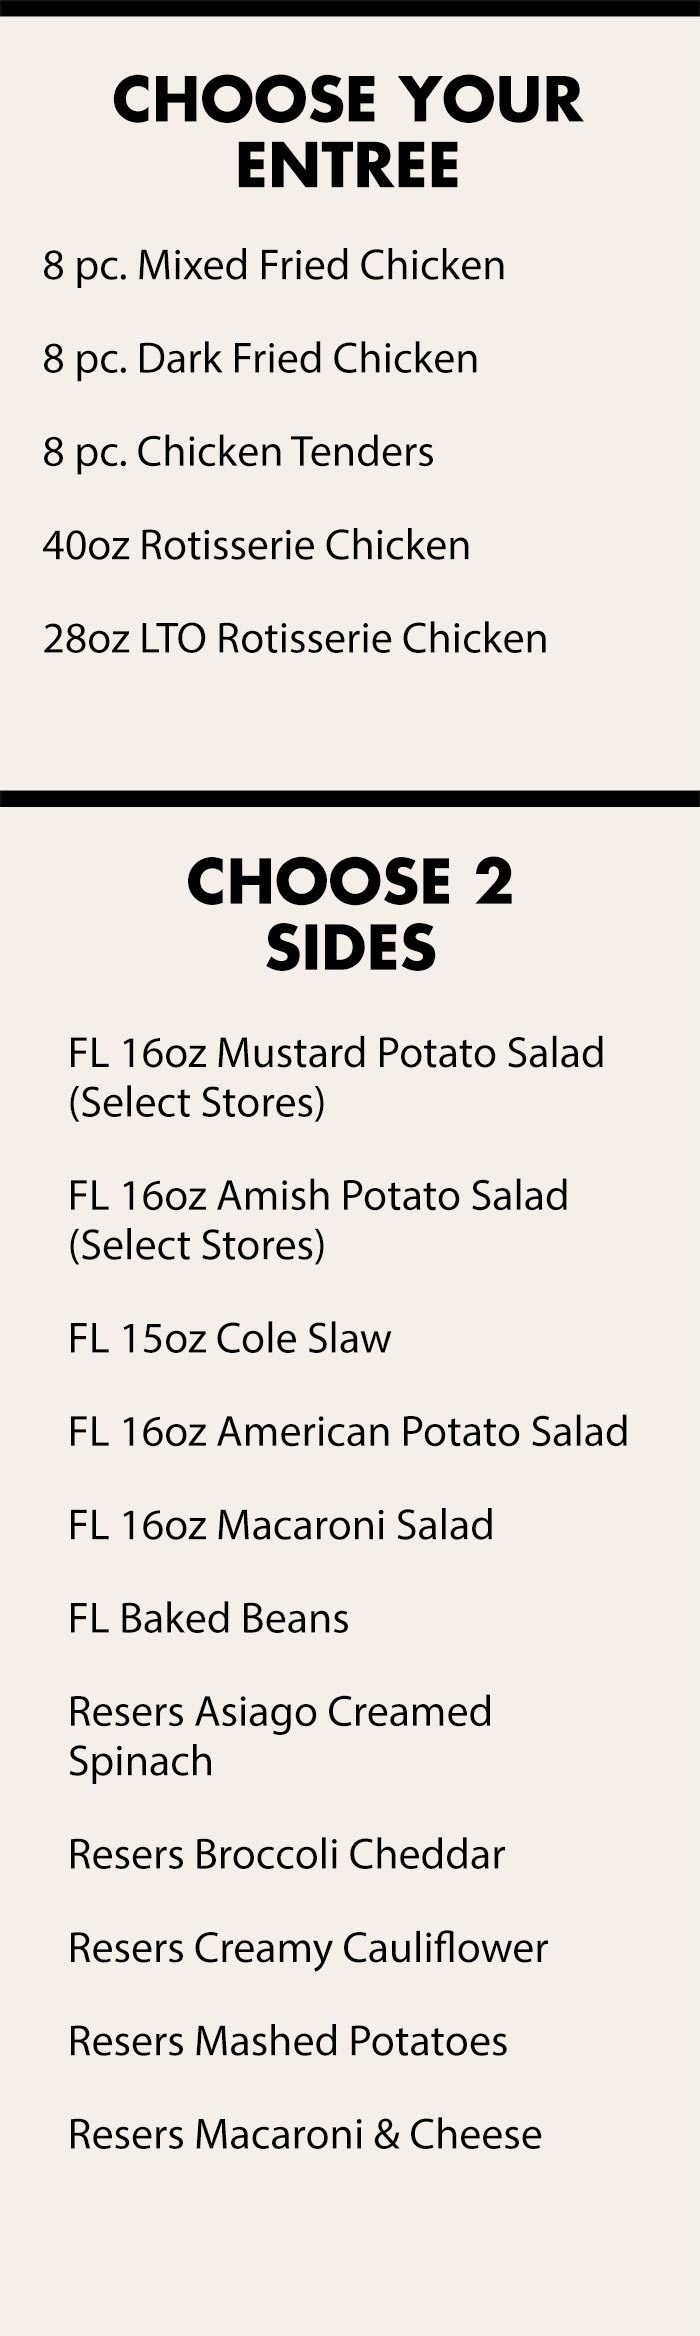 Choose your Entree: 8 pc. Mixed Fried Chicken, 8 pc. Dark Fried Chicken, 8 pc. Chicken Tenders, 40oz Rotisserie Chicken, 28oz LTO Rotisserie Chicken; Choose 2 Sides: FL 16oz Mustard Potato Salad (Select Stores), FL 16oz Amish Potato Salad (Select Stores), FL 15oz Cole Slaw, FL 16oz American Potato Salad, FL 16oz Macaroni Salad, FL Baked Beans, Resers Asiago Creamed Spinach, Resers Broccoli Cheddar, Resers Creamy Cauliflower, Resers Mashed Potatoes, Resers Macaroni &amp; Cheese;